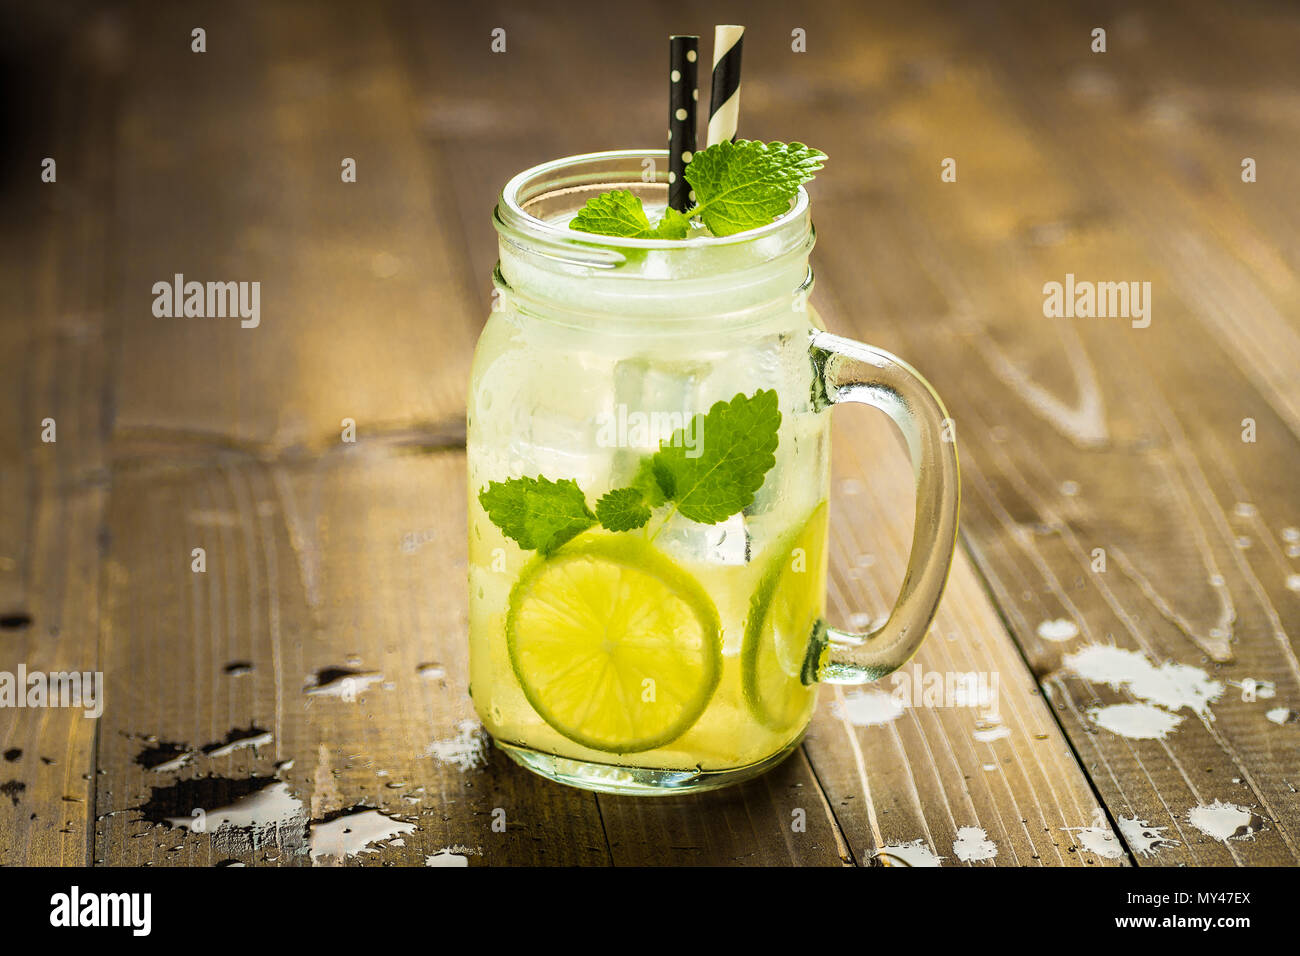 Cold Fresh Lemonade Mojito Cocktail With Ice Lemon And Mint Leaves In Mason Jar On Rustic Dark Wooden Background Summer Concept Stock Photo Alamy